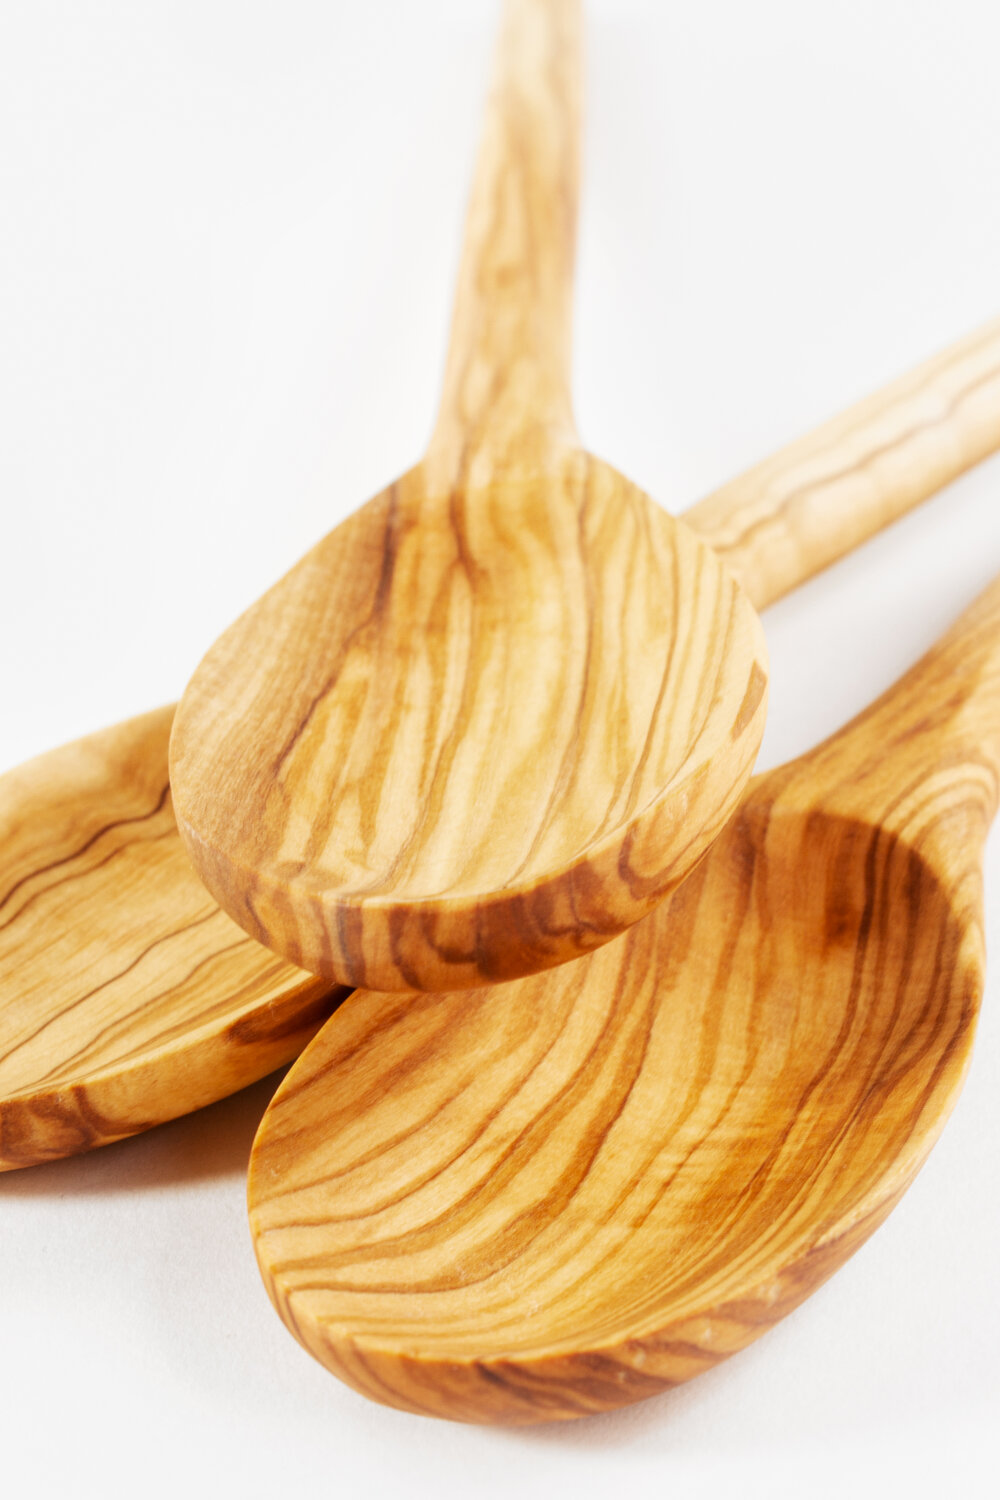 https://images.squarespace-cdn.com/content/v1/5e29c5be77311200d3bb400e/1626365927379-57BEVZWL9NDHXWYWEWPG/Olive_Wood_Cooking_Spoon_2.jpg?format=1000w